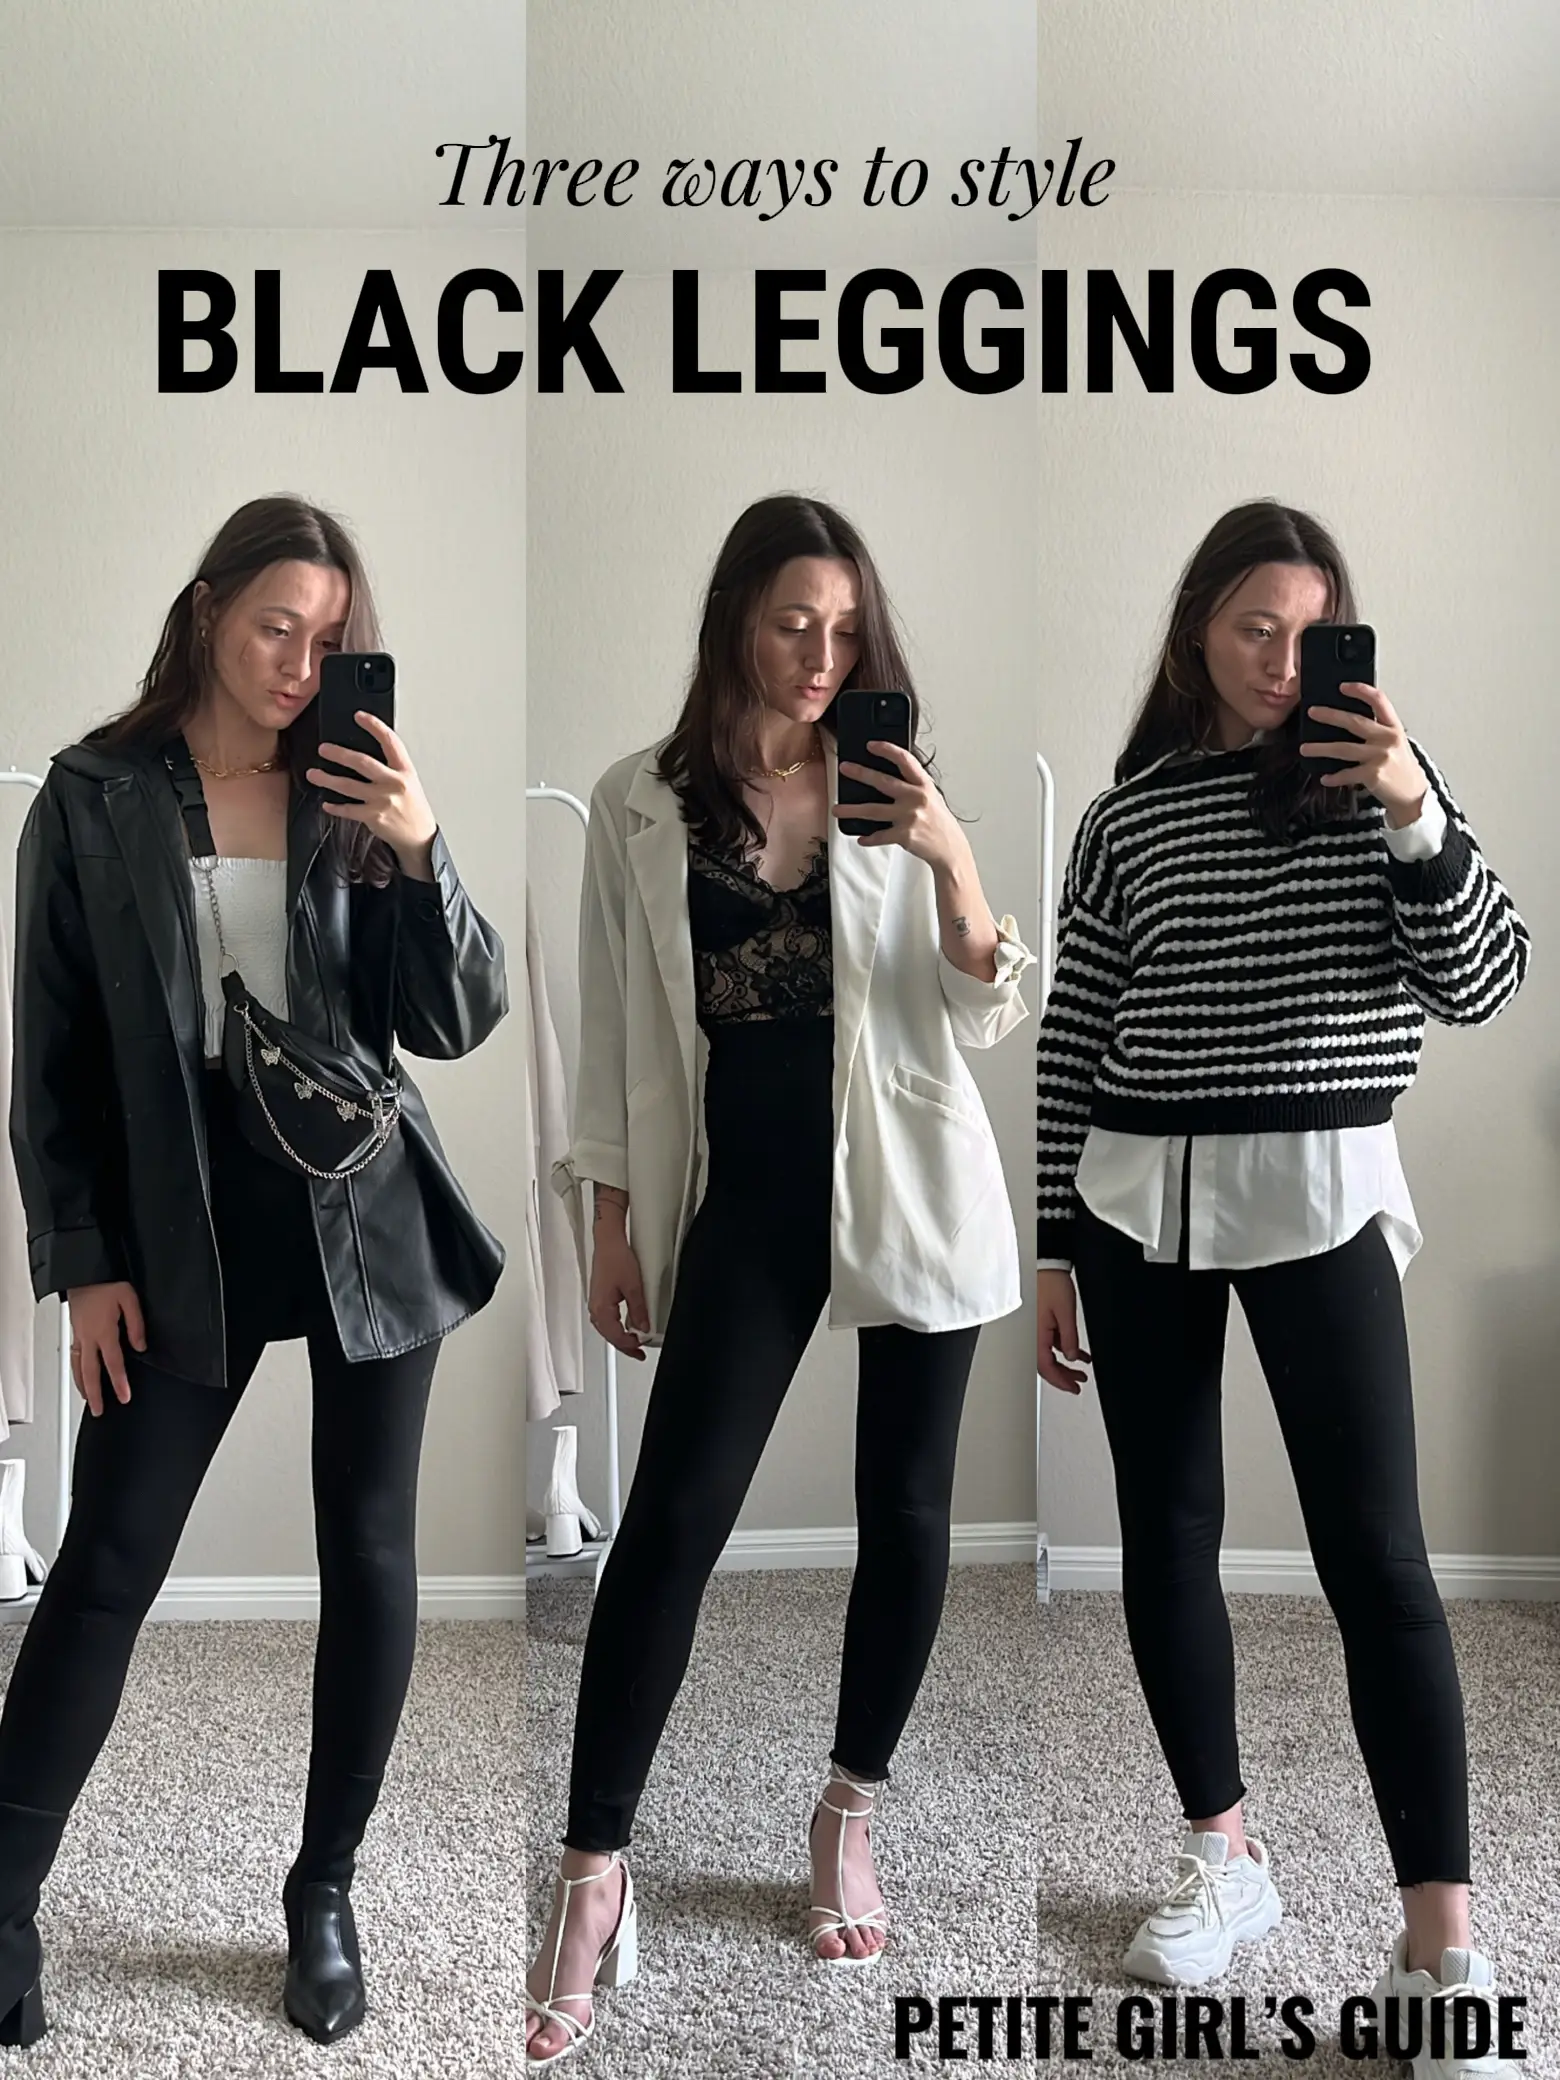 How to style Black Leggings 🖤⚫️, Gallery posted by thamysenem